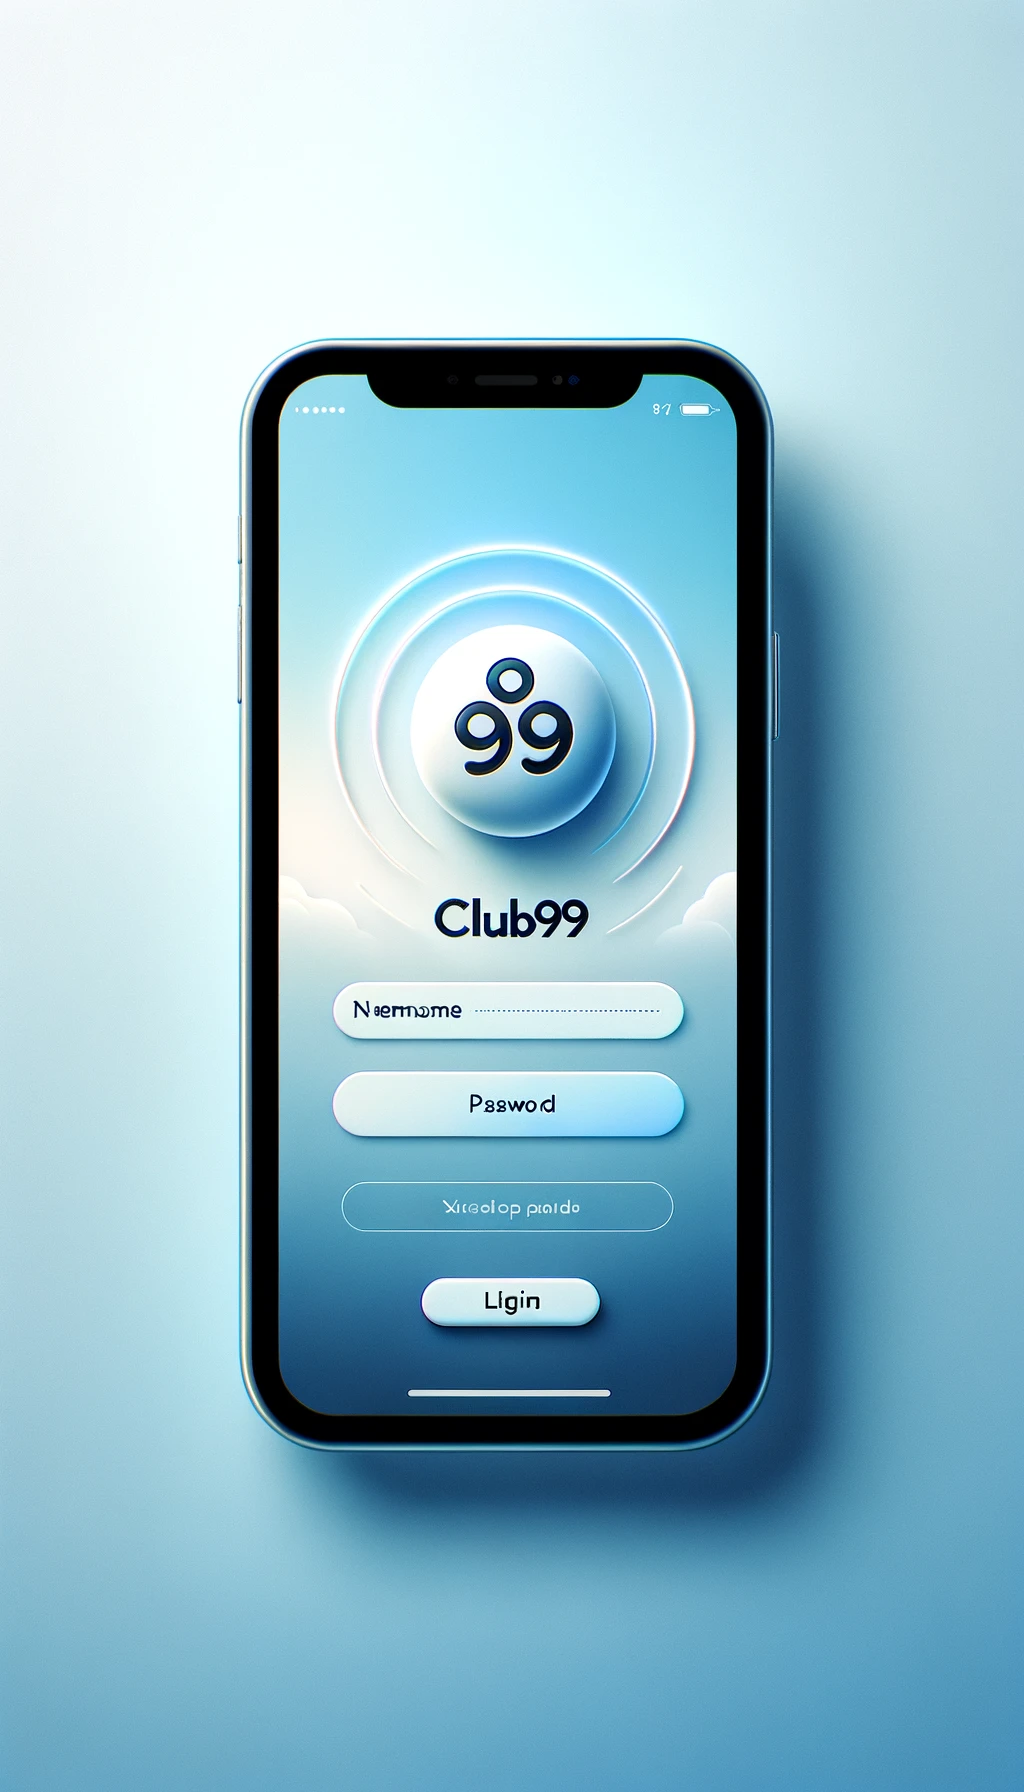 Club99 iOS Login: A Comprehensive Guide to Accessing and Maximizing Your Experience